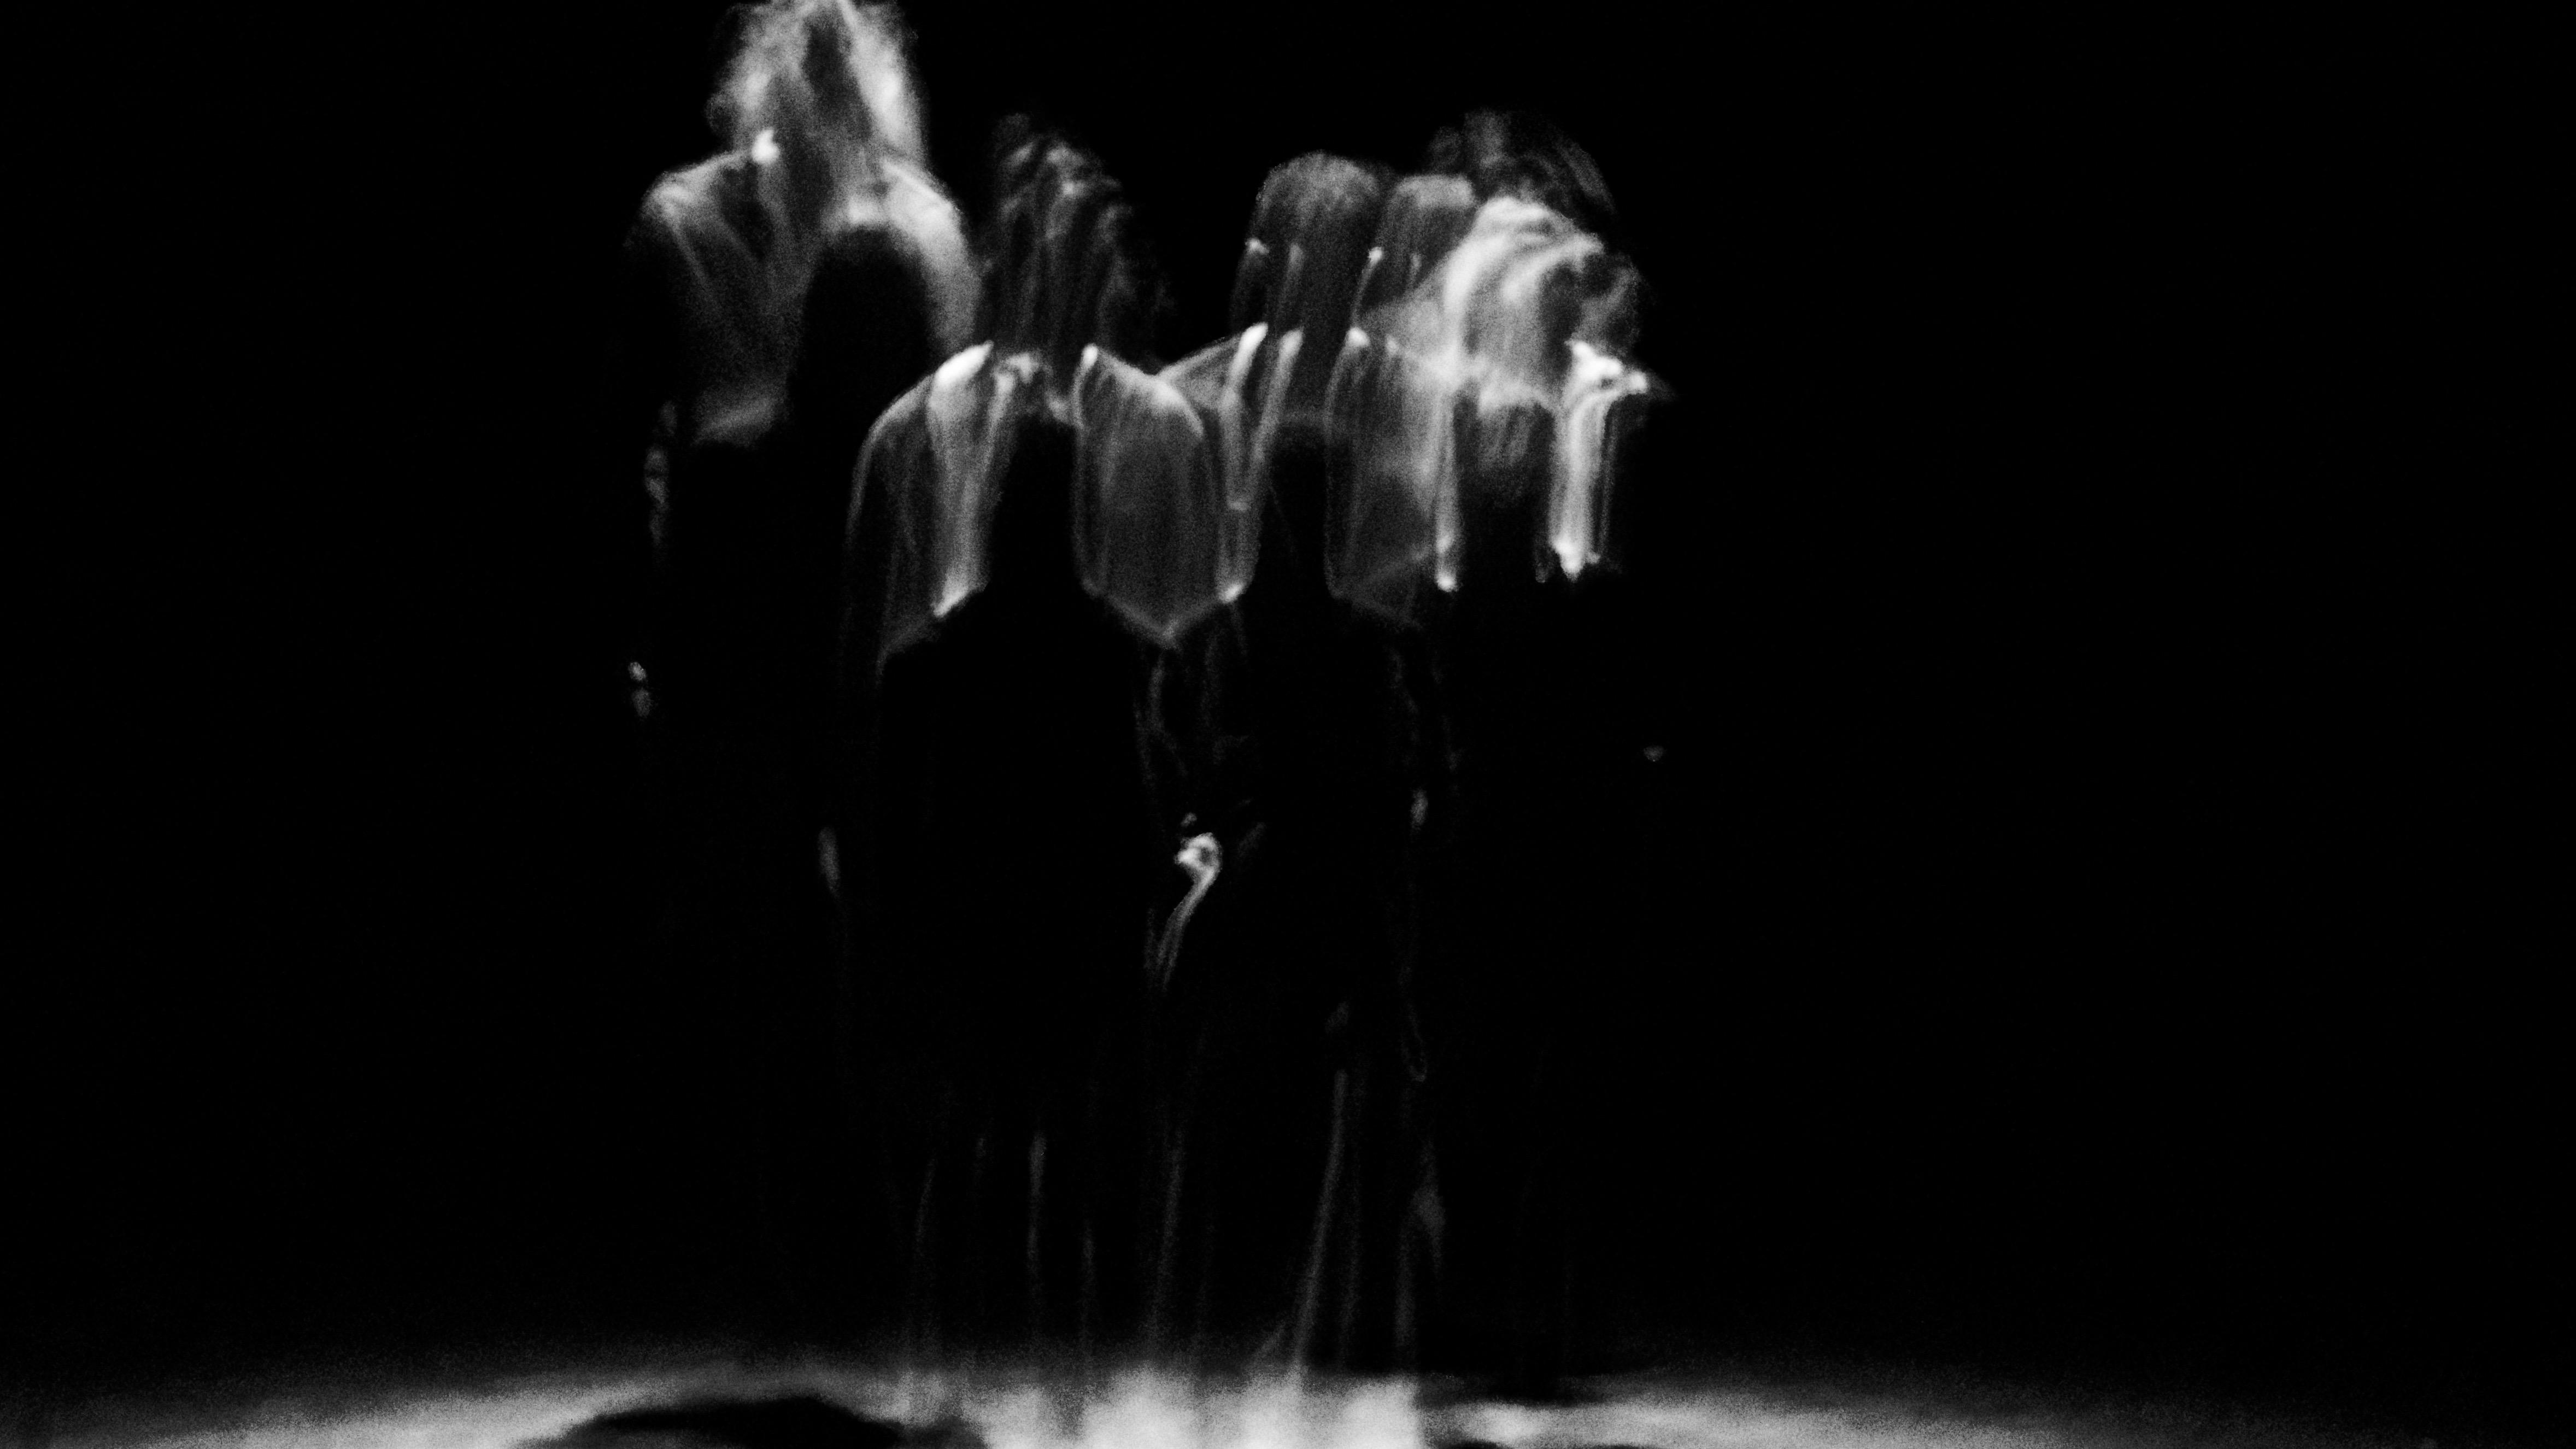 Blurry silhouettes dancing in the dark, illuminated by a ray of light